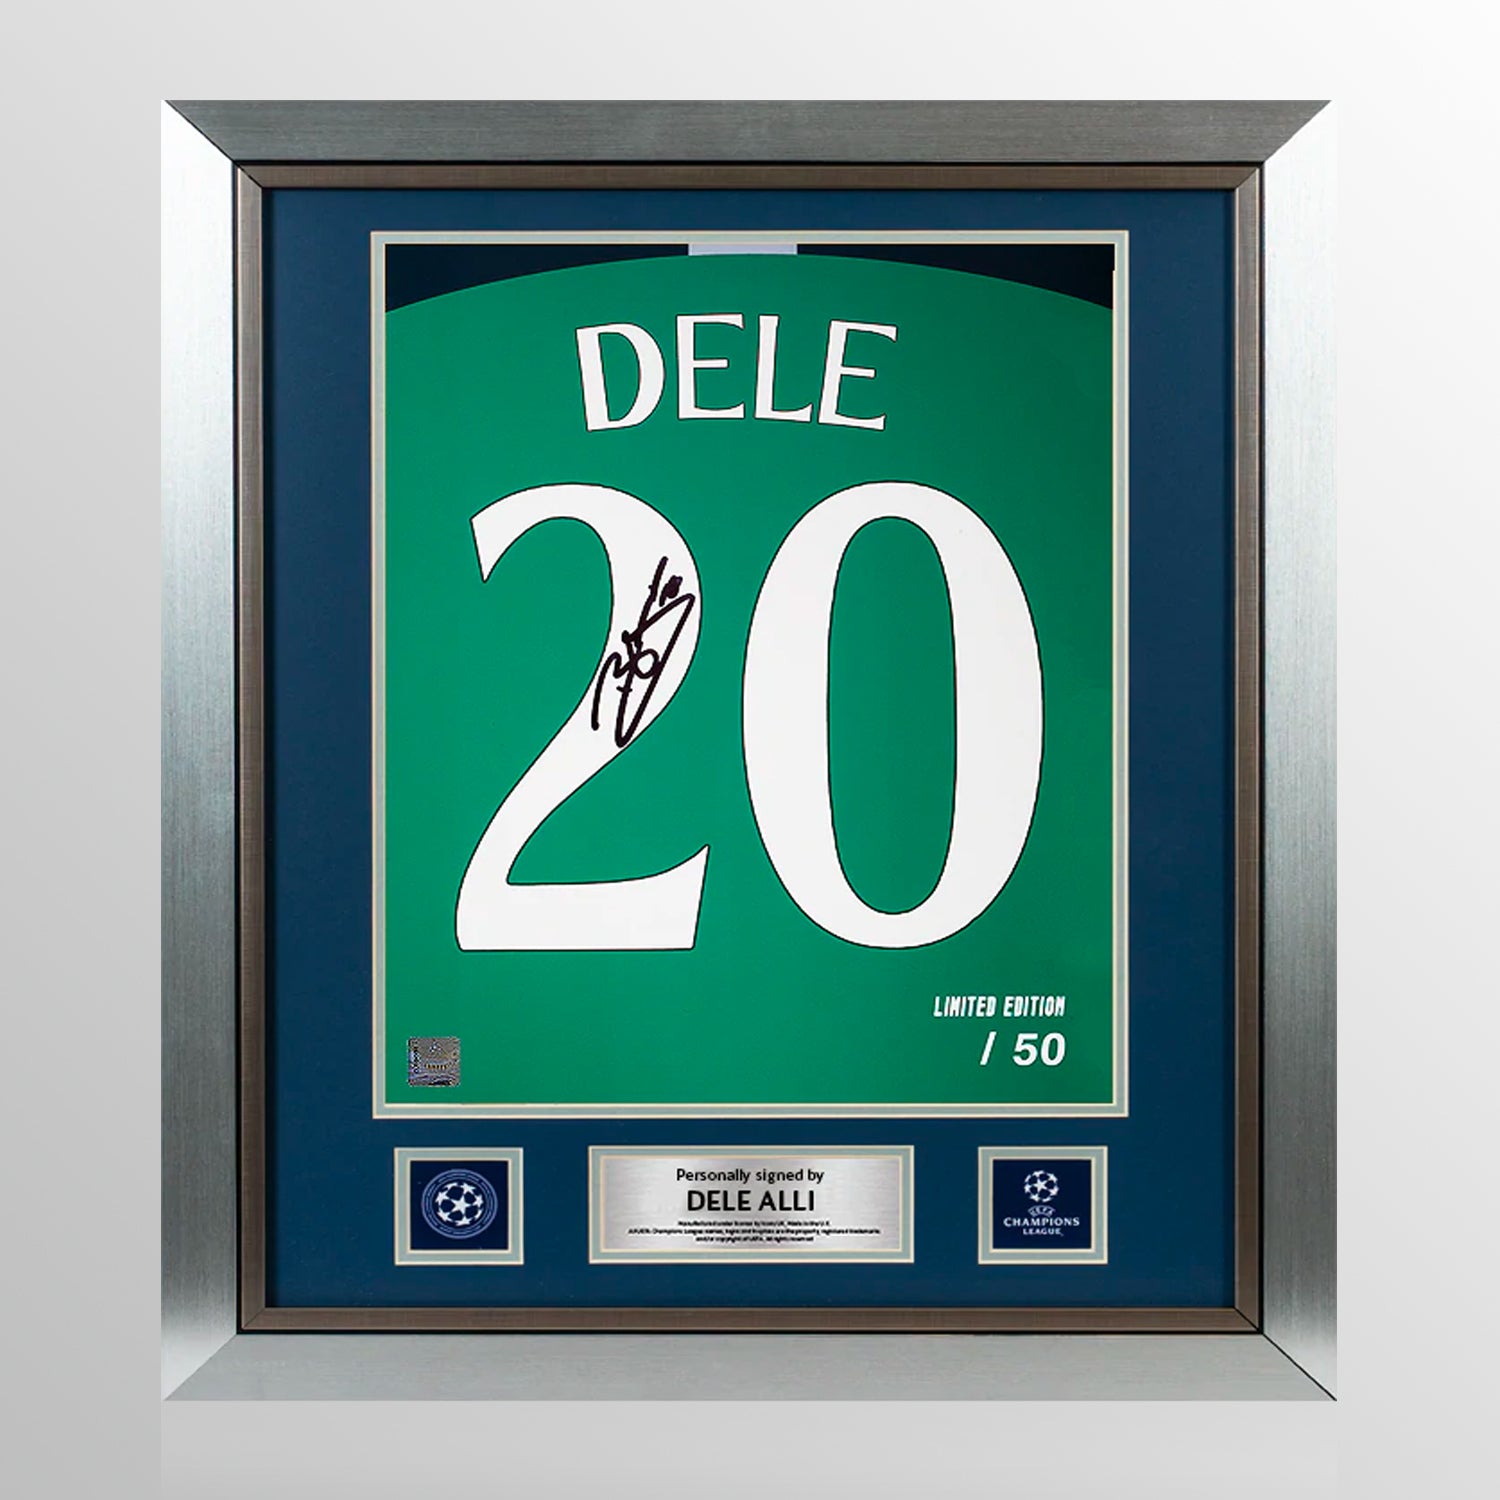 Dele Alli Official UEFA Champions League Signed and Framed Tottenham Hotspur 2018-19 Third Shirt Print UEFA Club Competitions Online Store